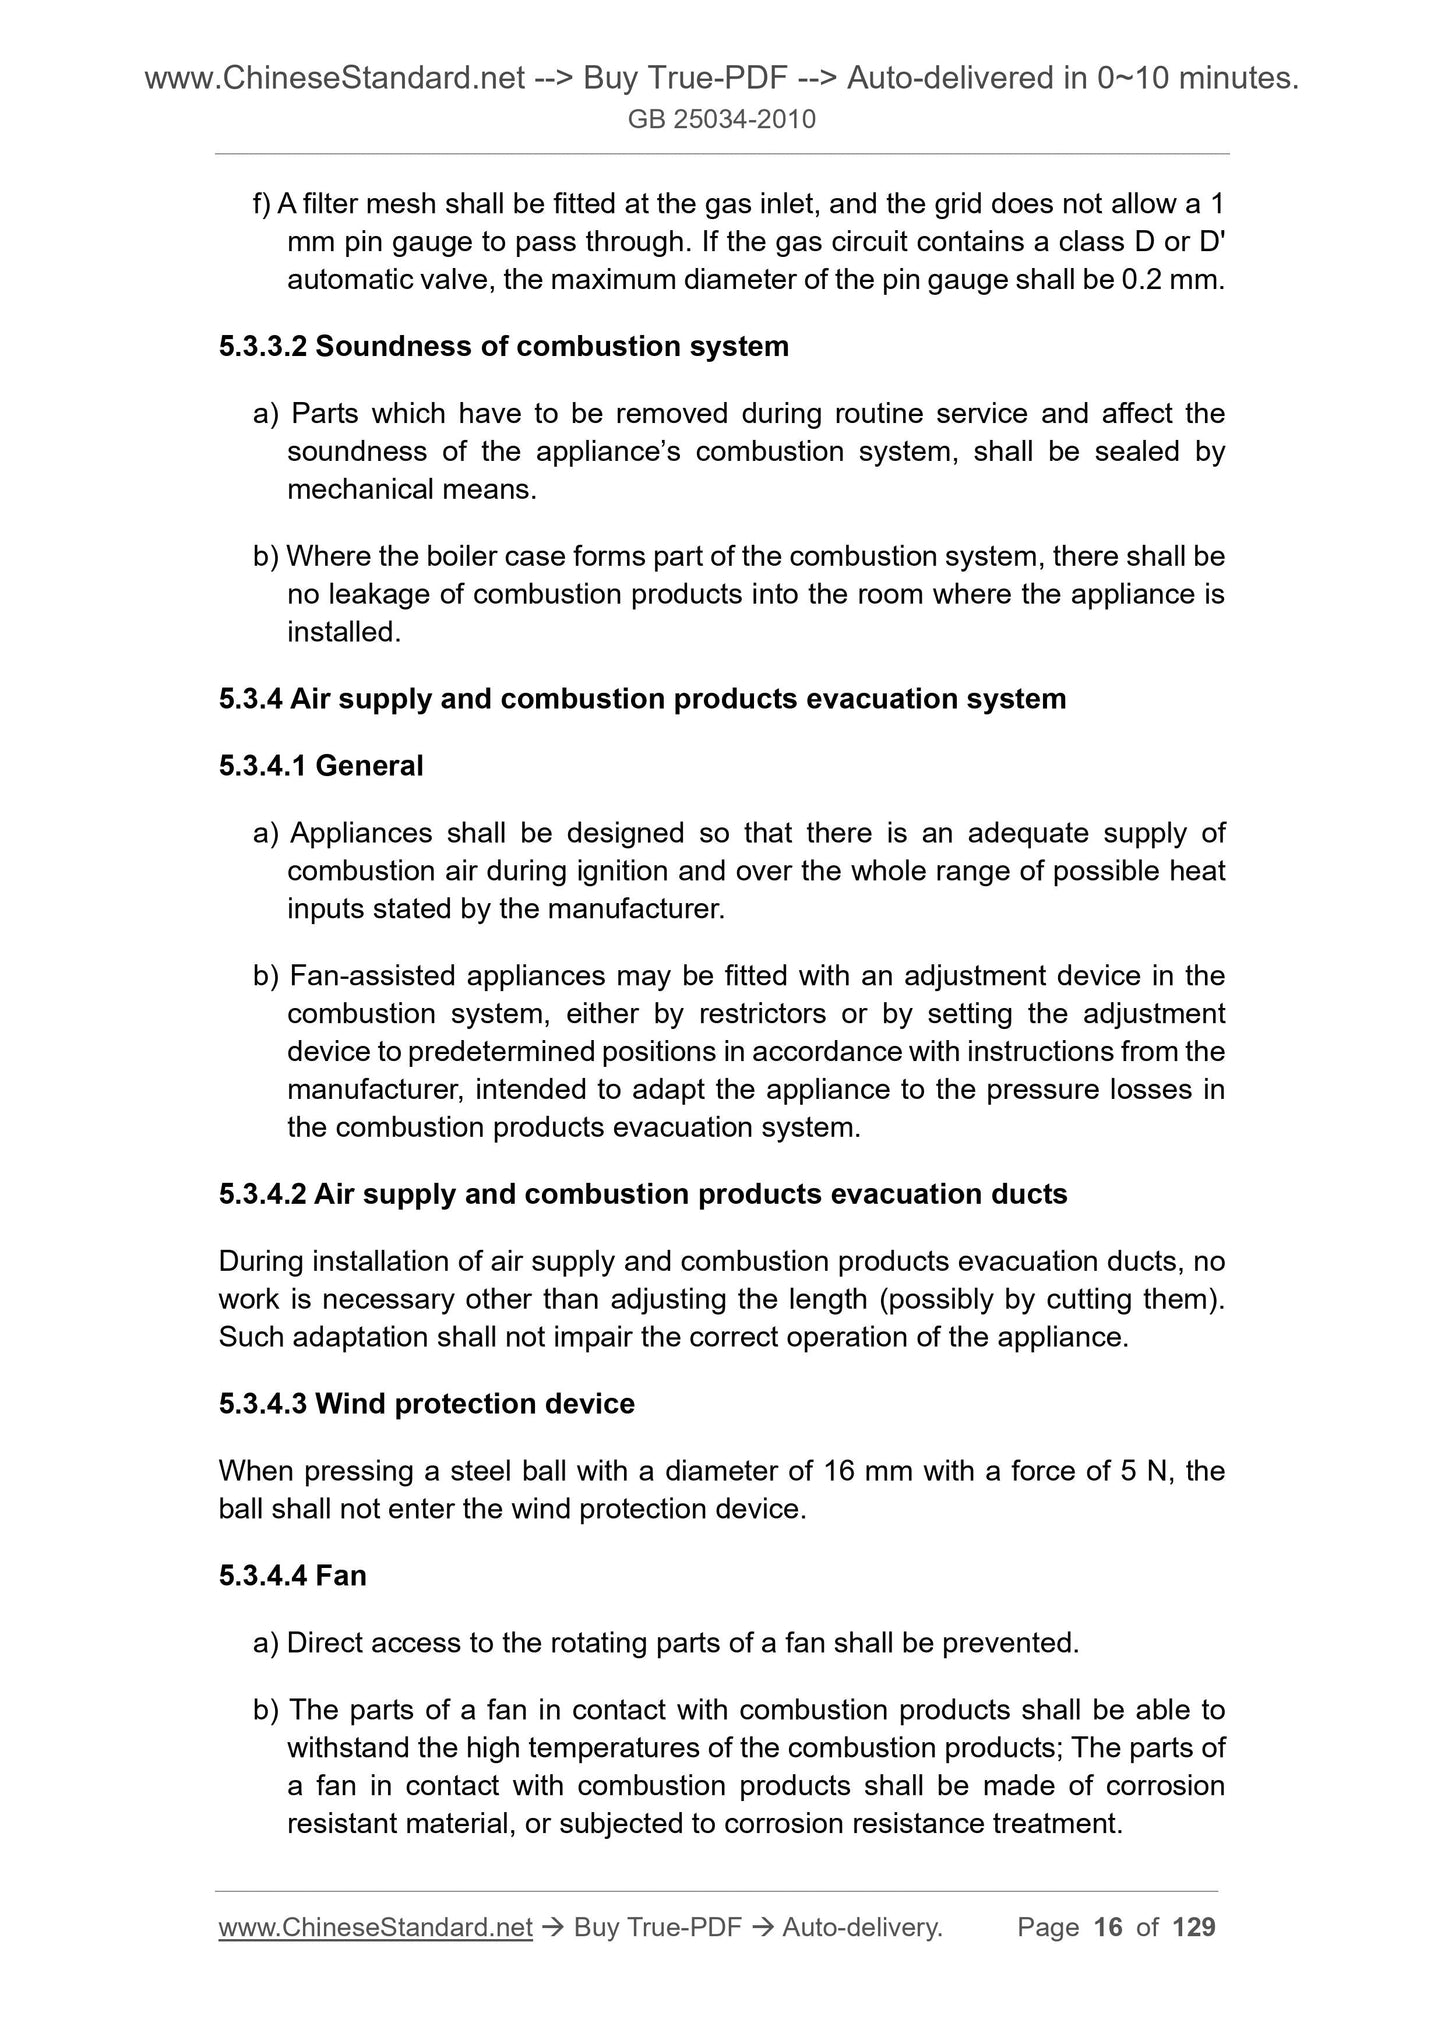 GB 25034-2010 Page 9